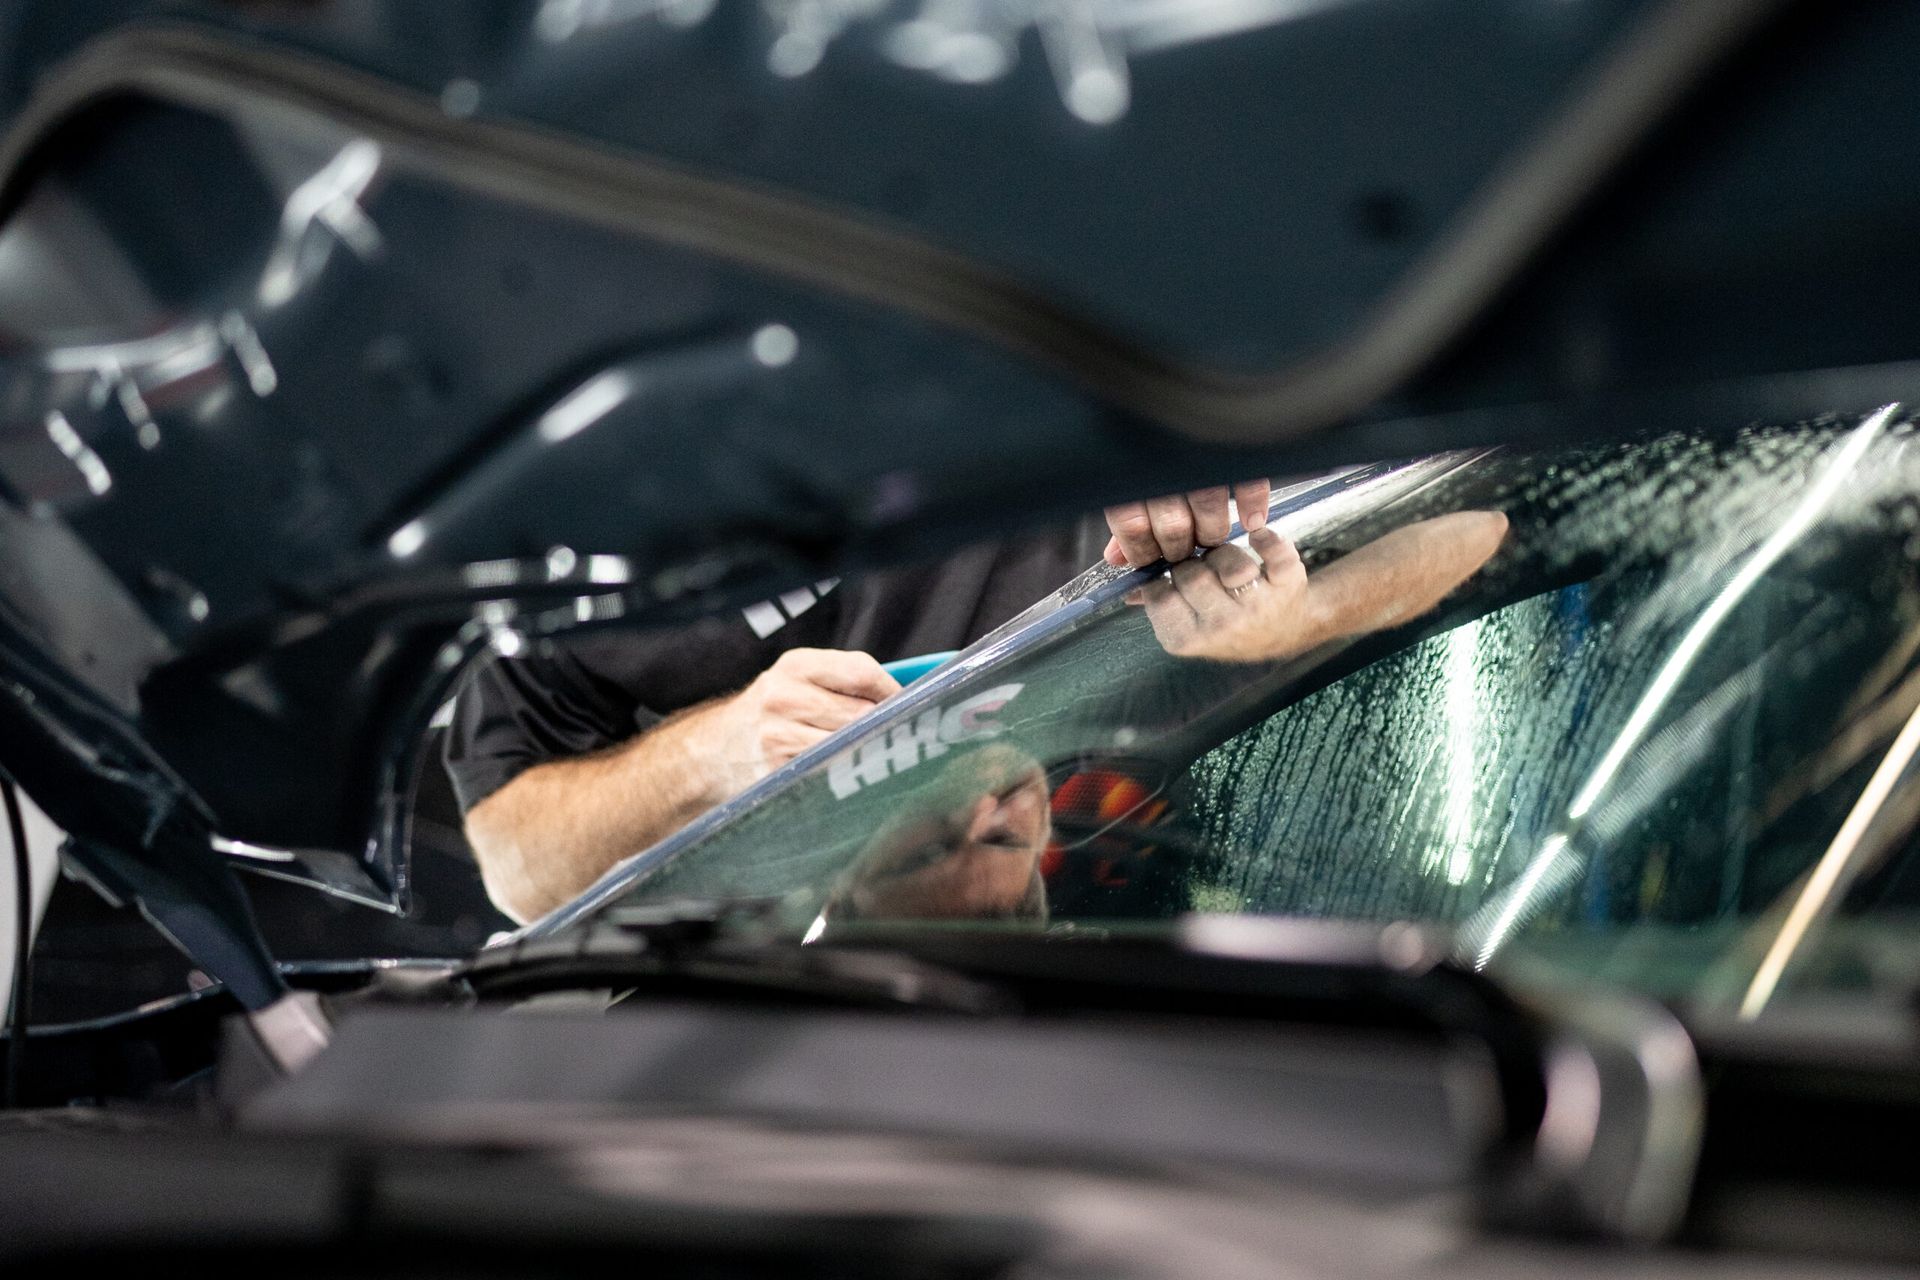 A man is cleaning the windshield of a car.